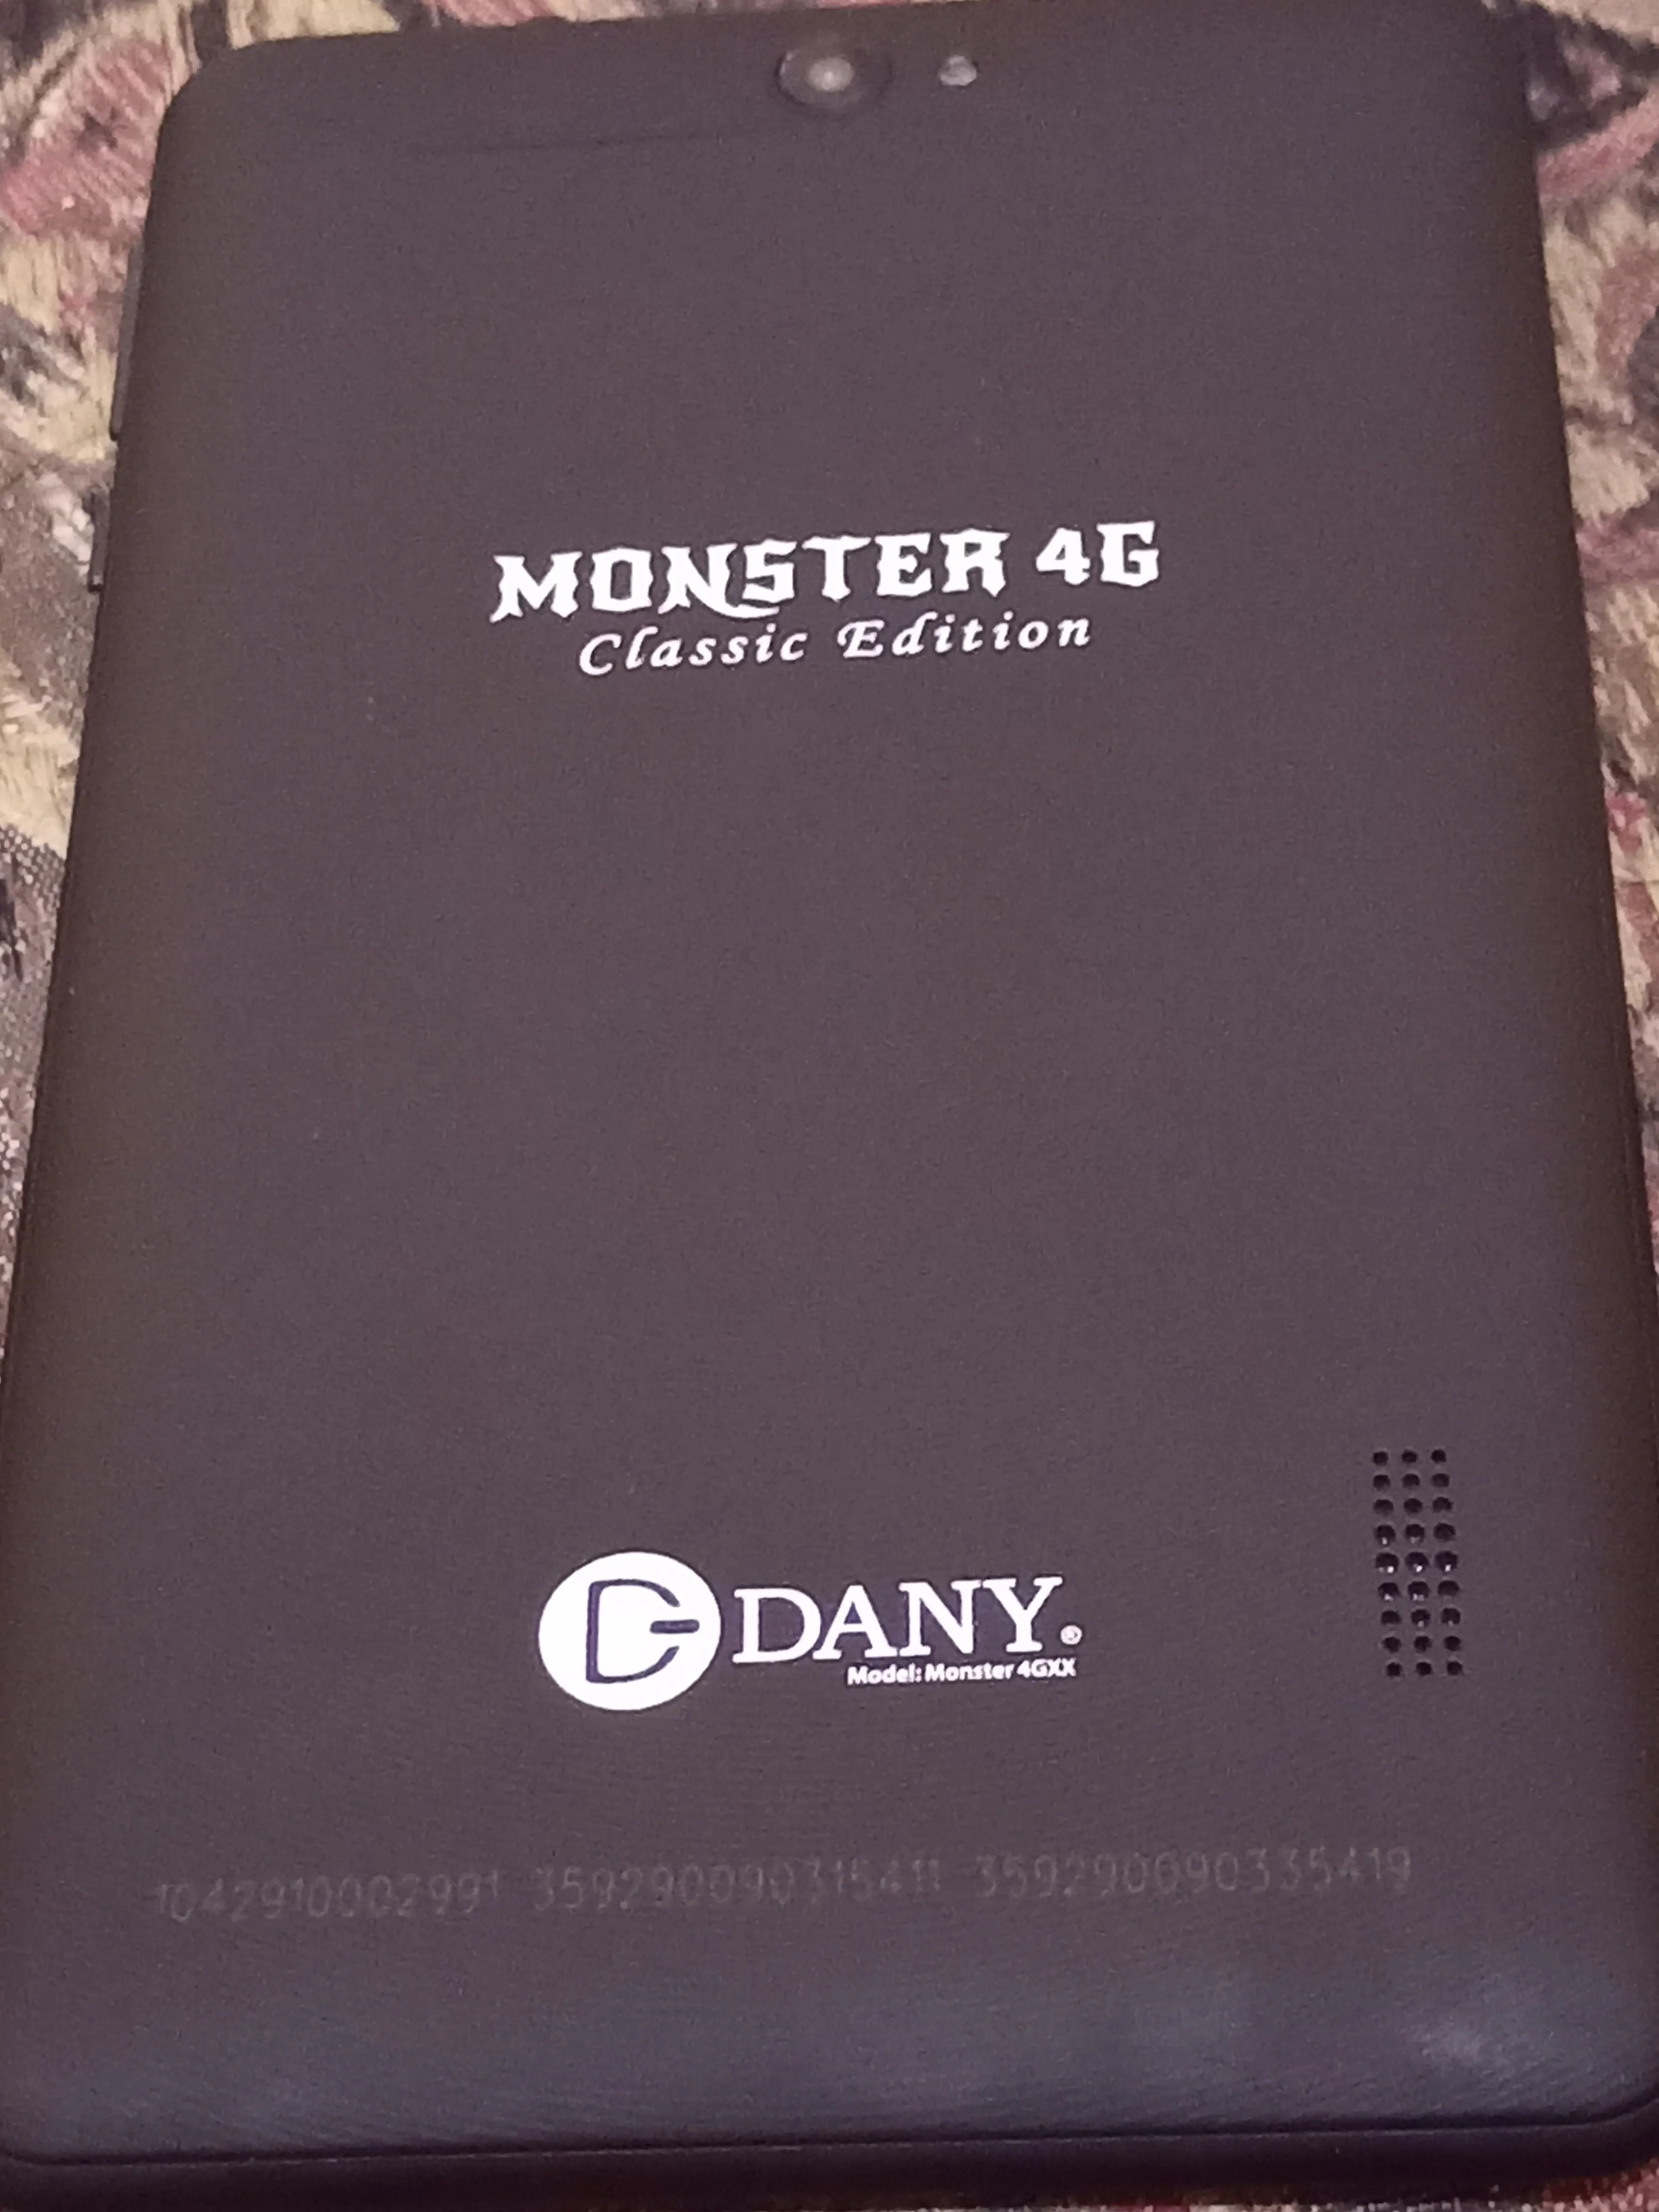 Dany 4g monster classic edition - photo 1